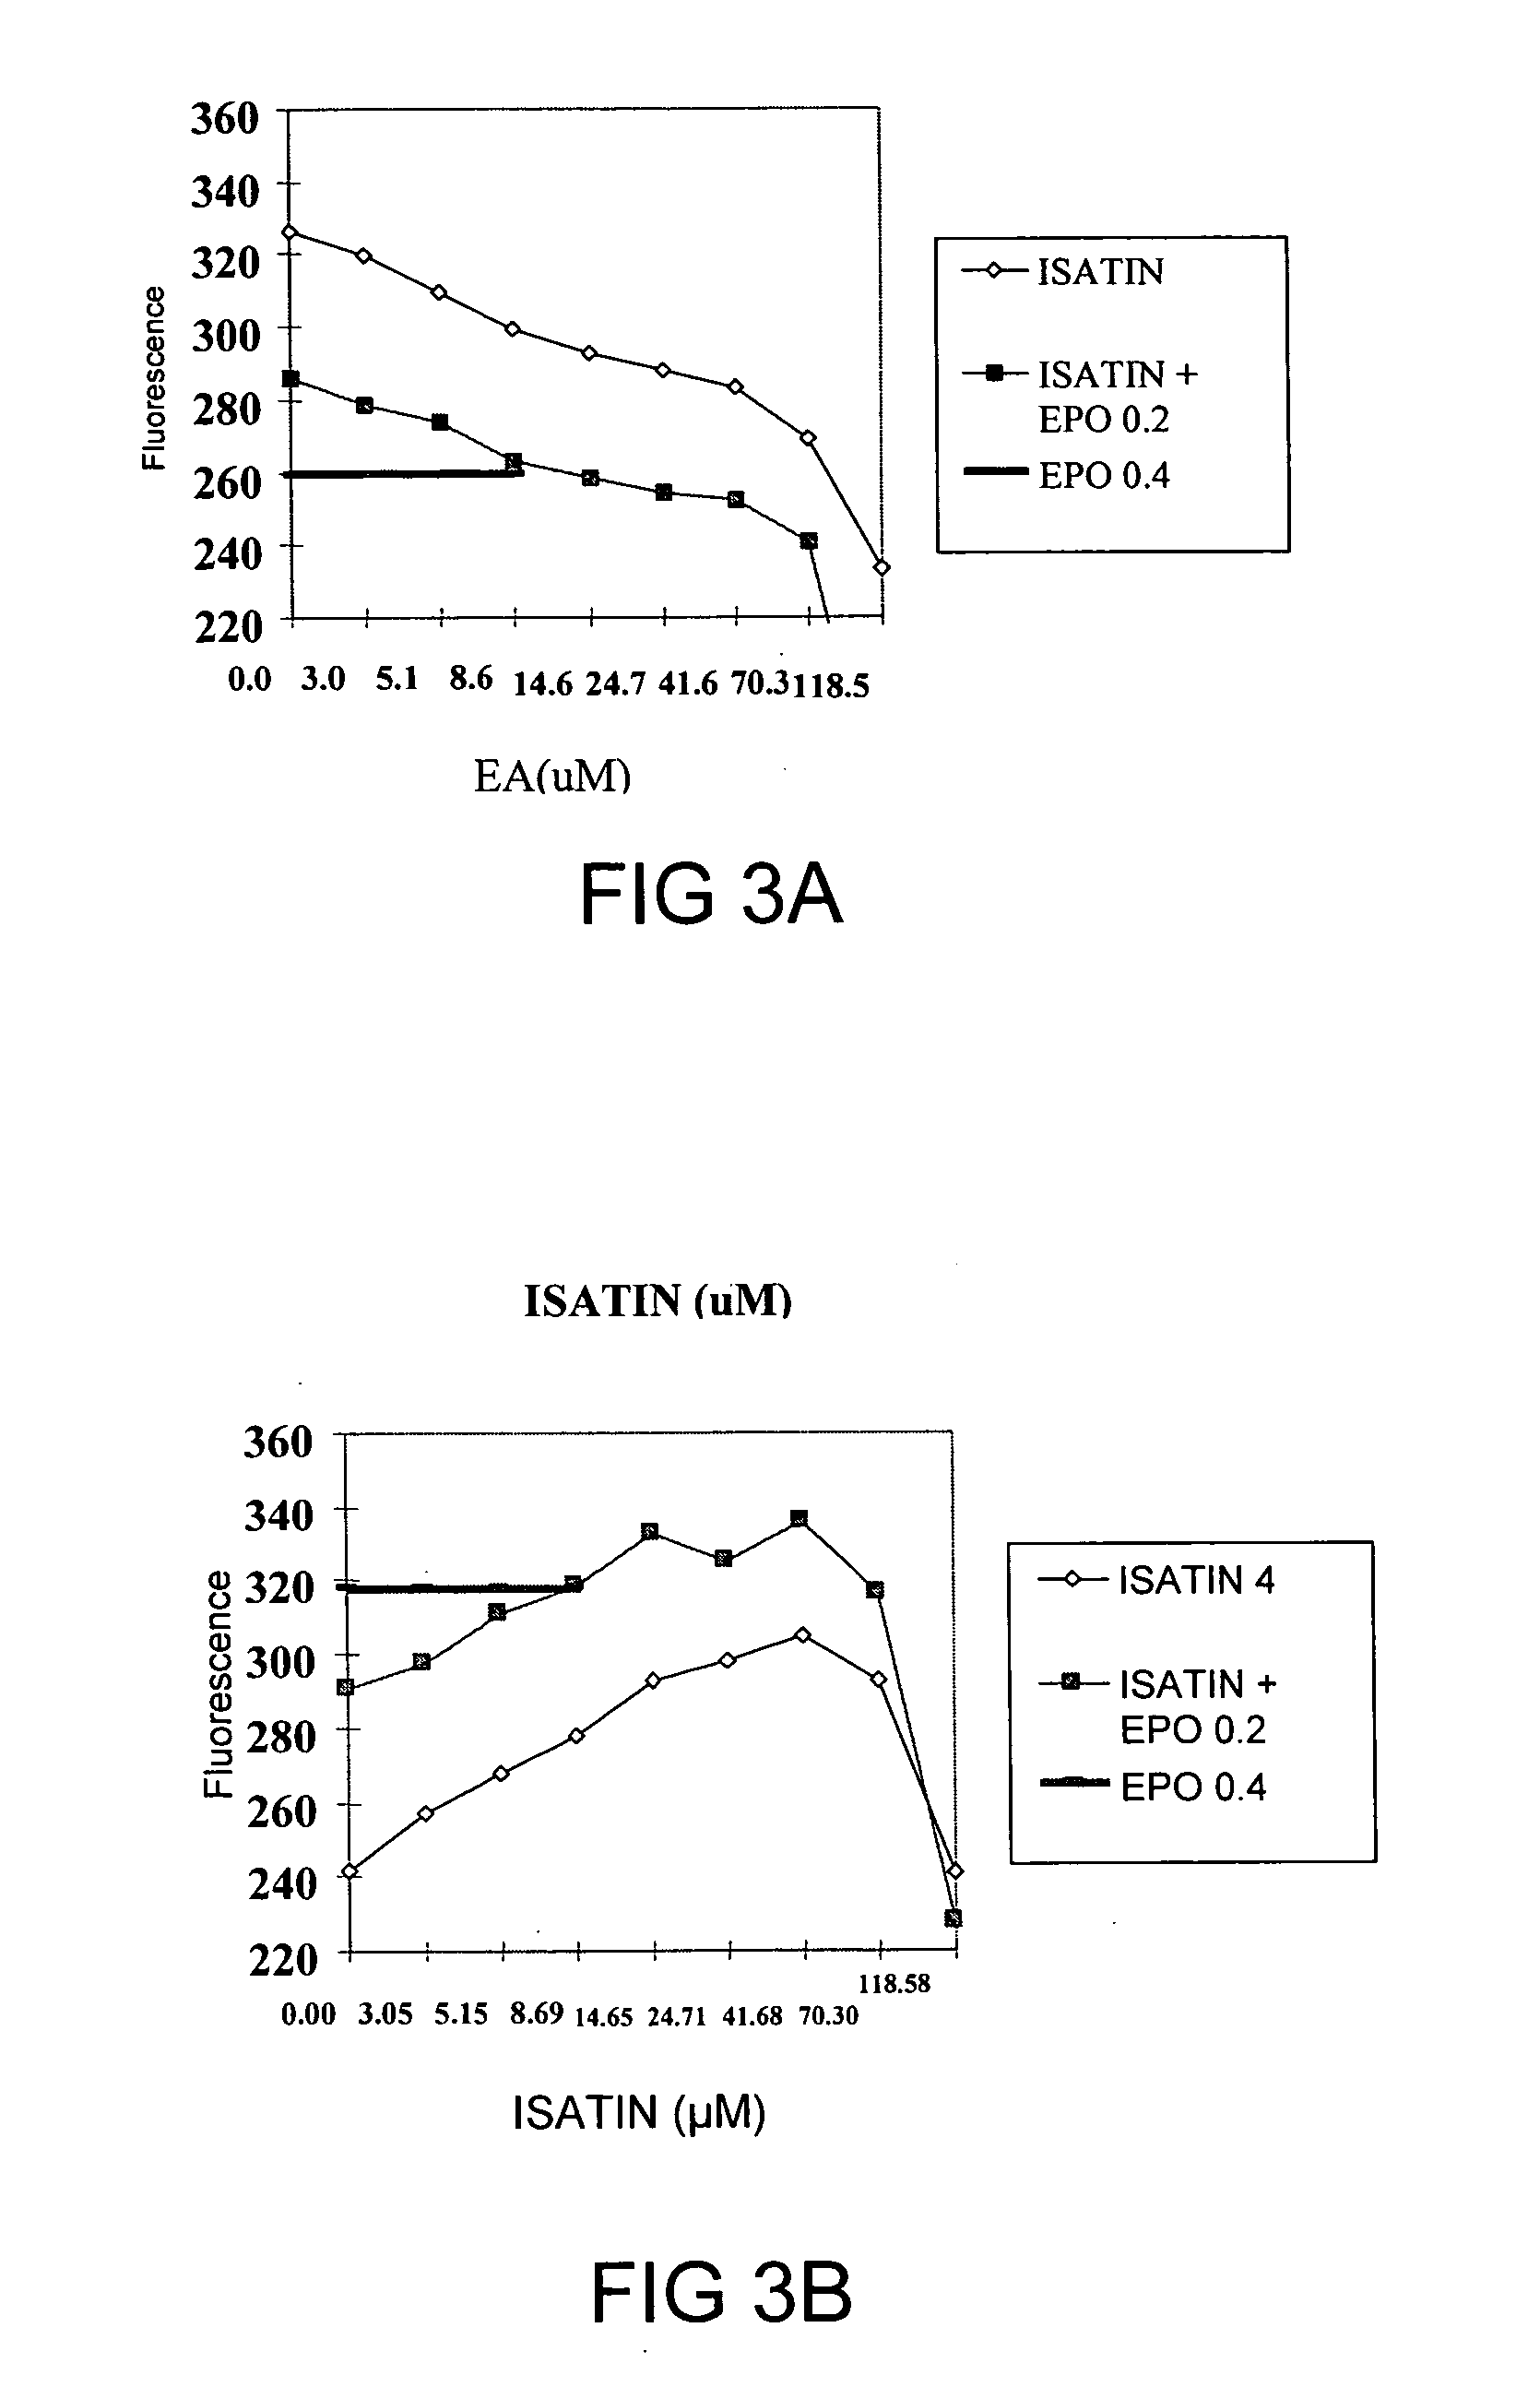 Use of Isatin in stimulating red blood cell production and treatment of anemia